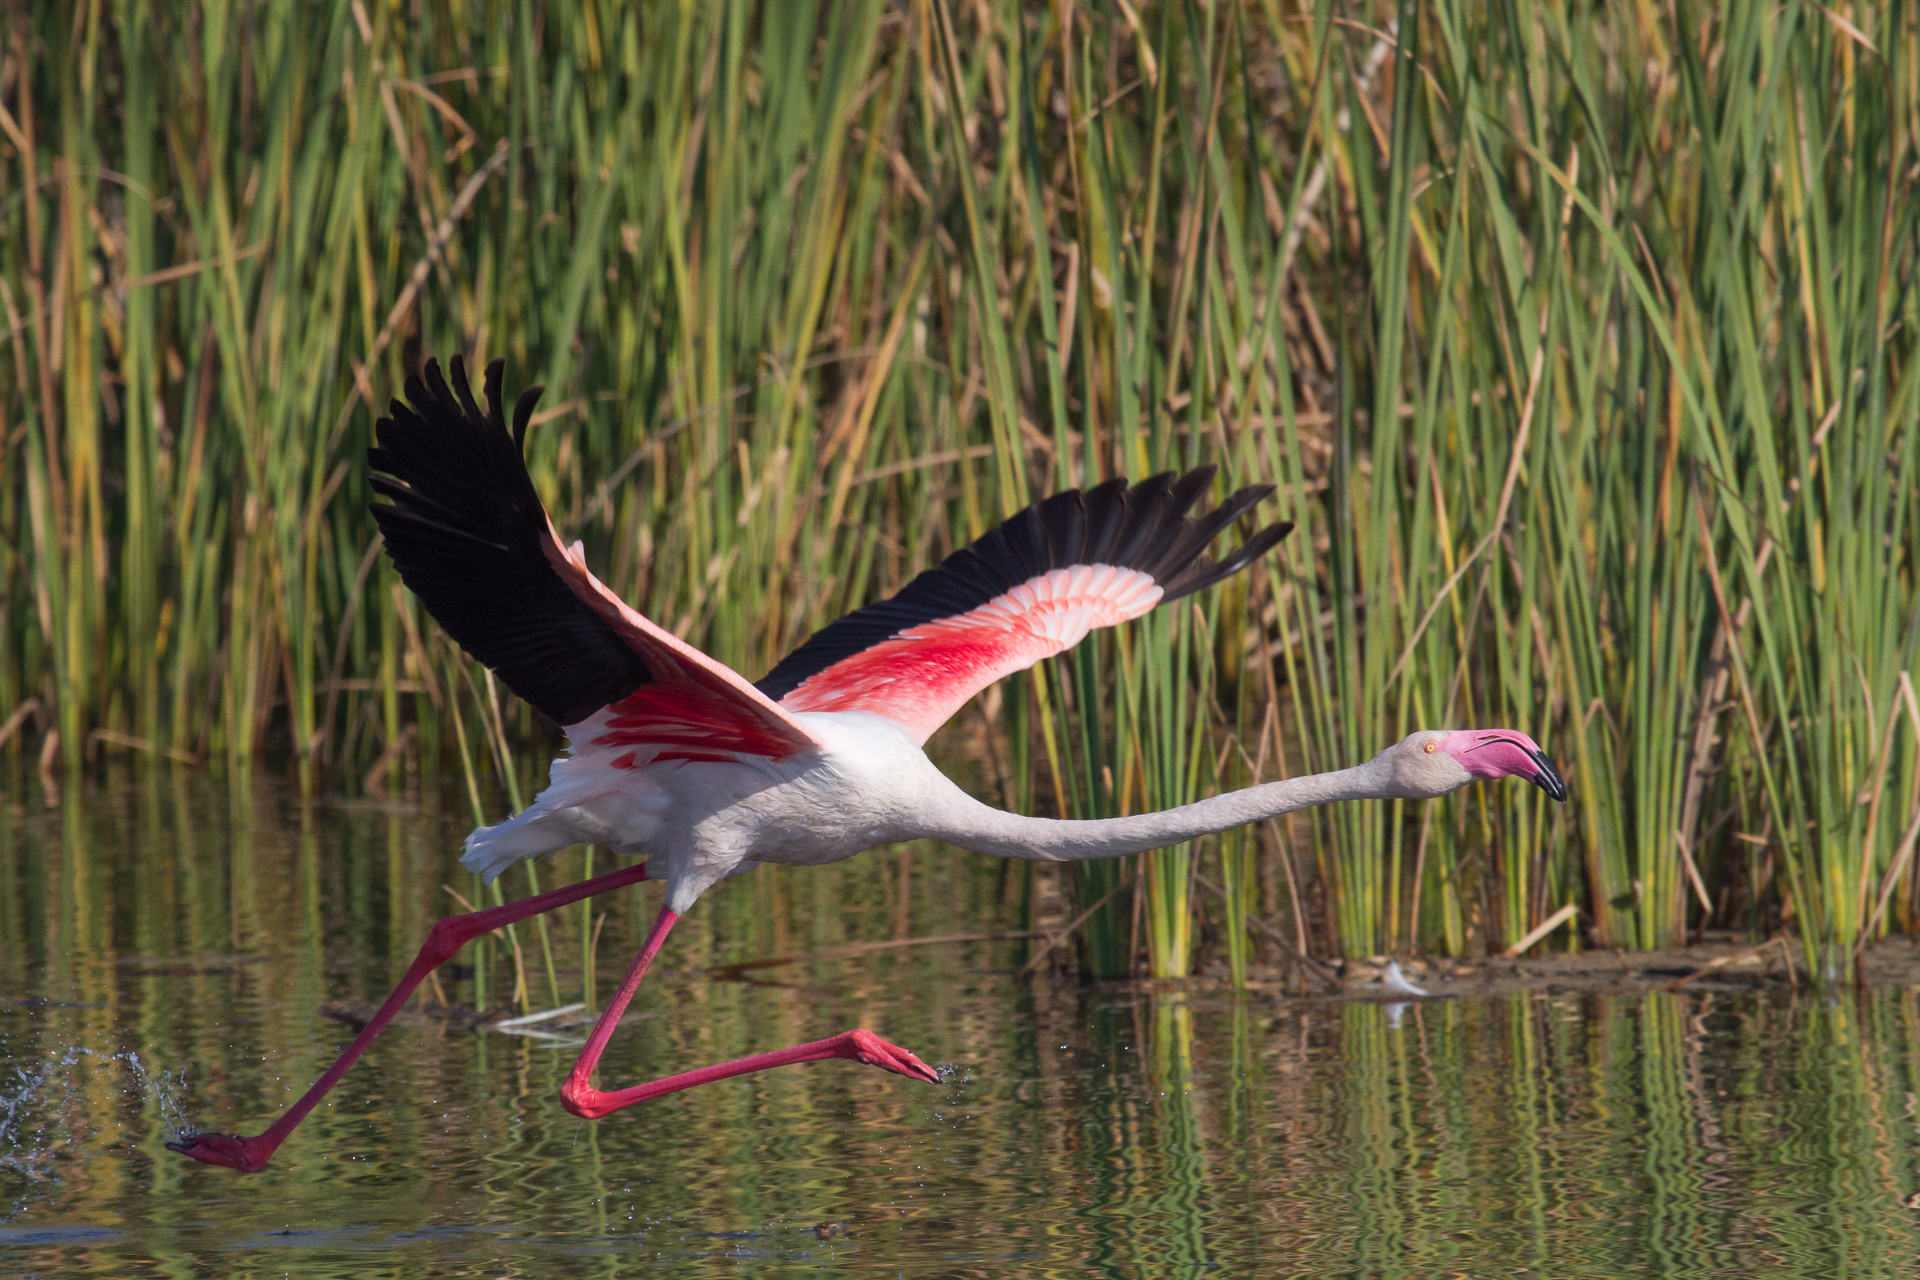 Greater flamingo, Marivale, South Africa